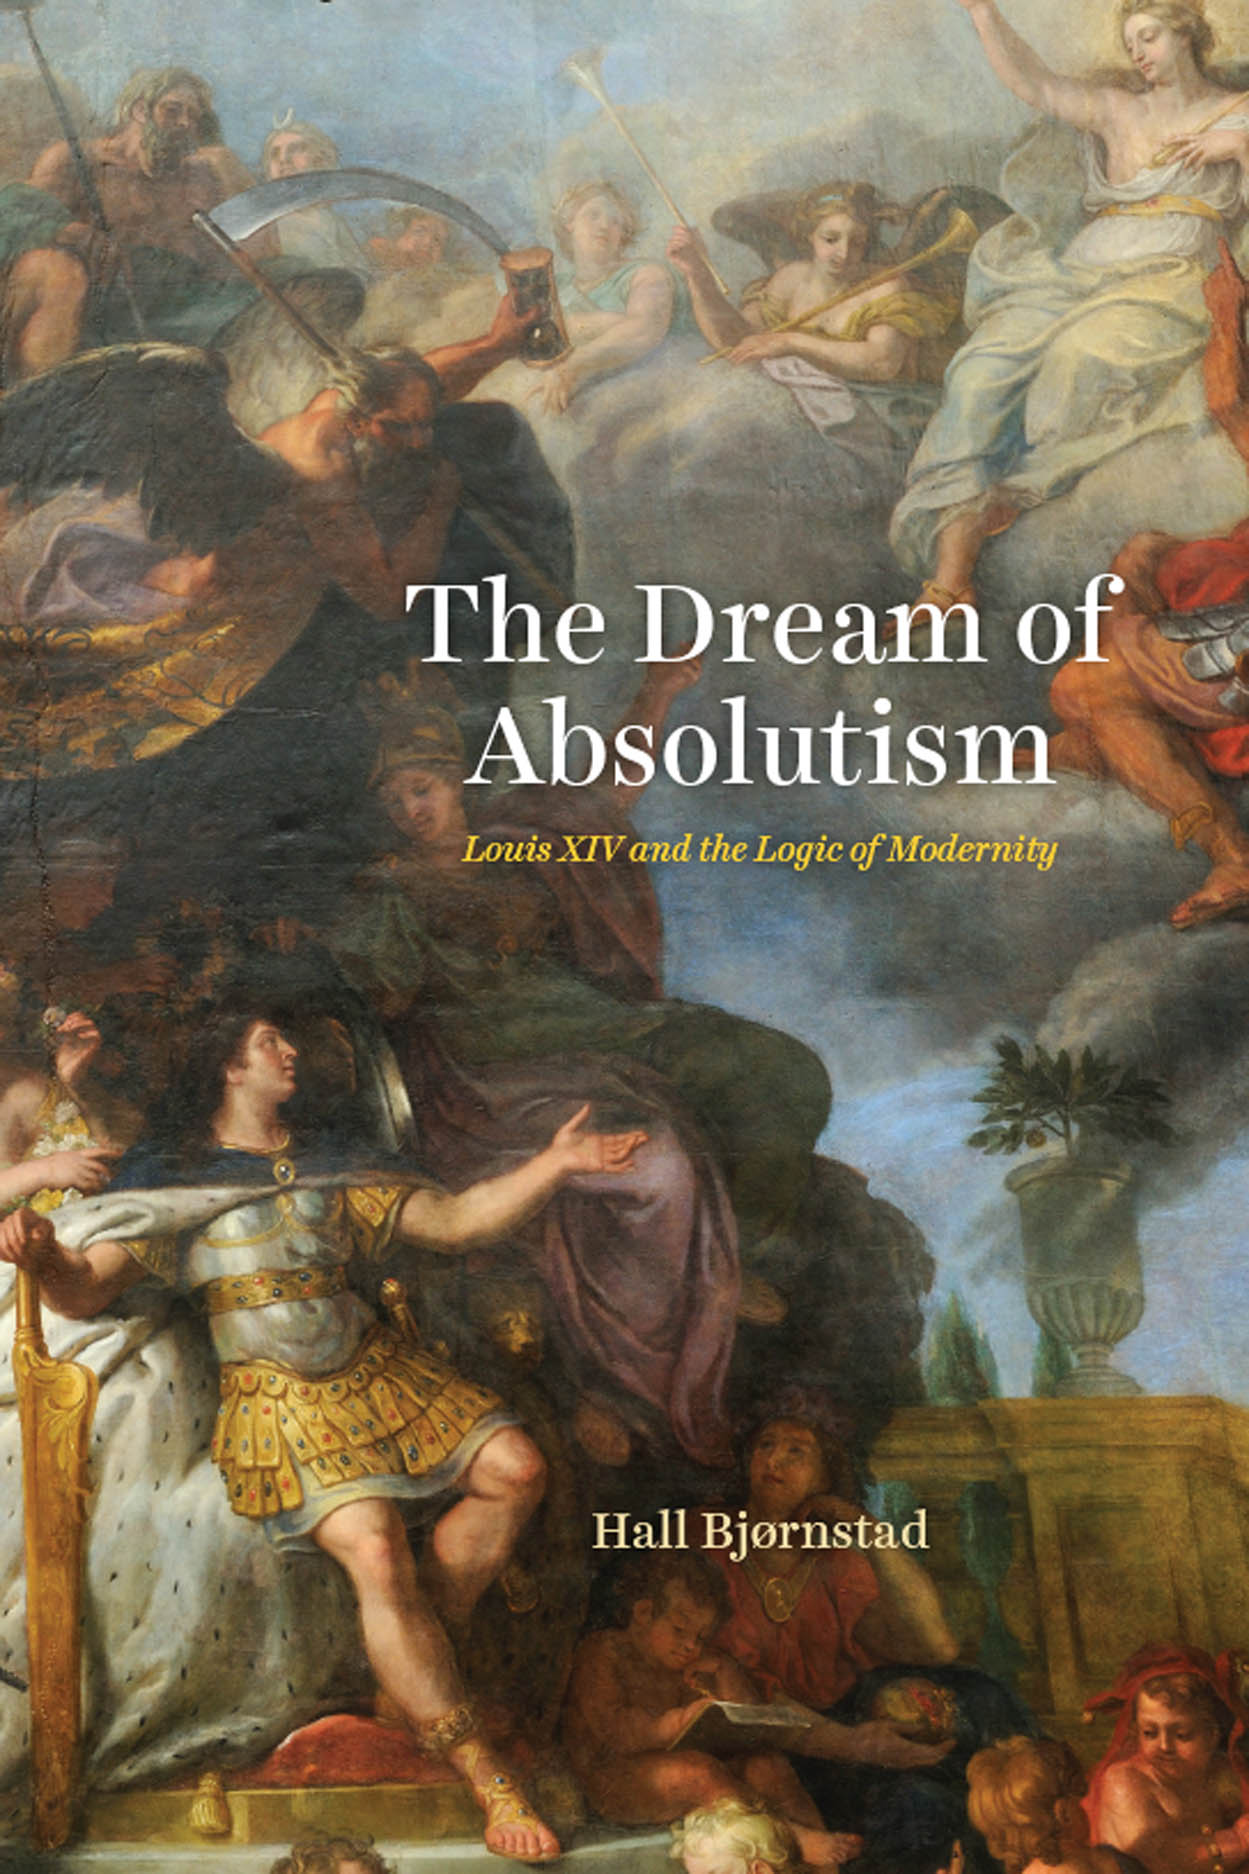 The Dream of Absolutism: Louis XIV and the Logic of Modernity